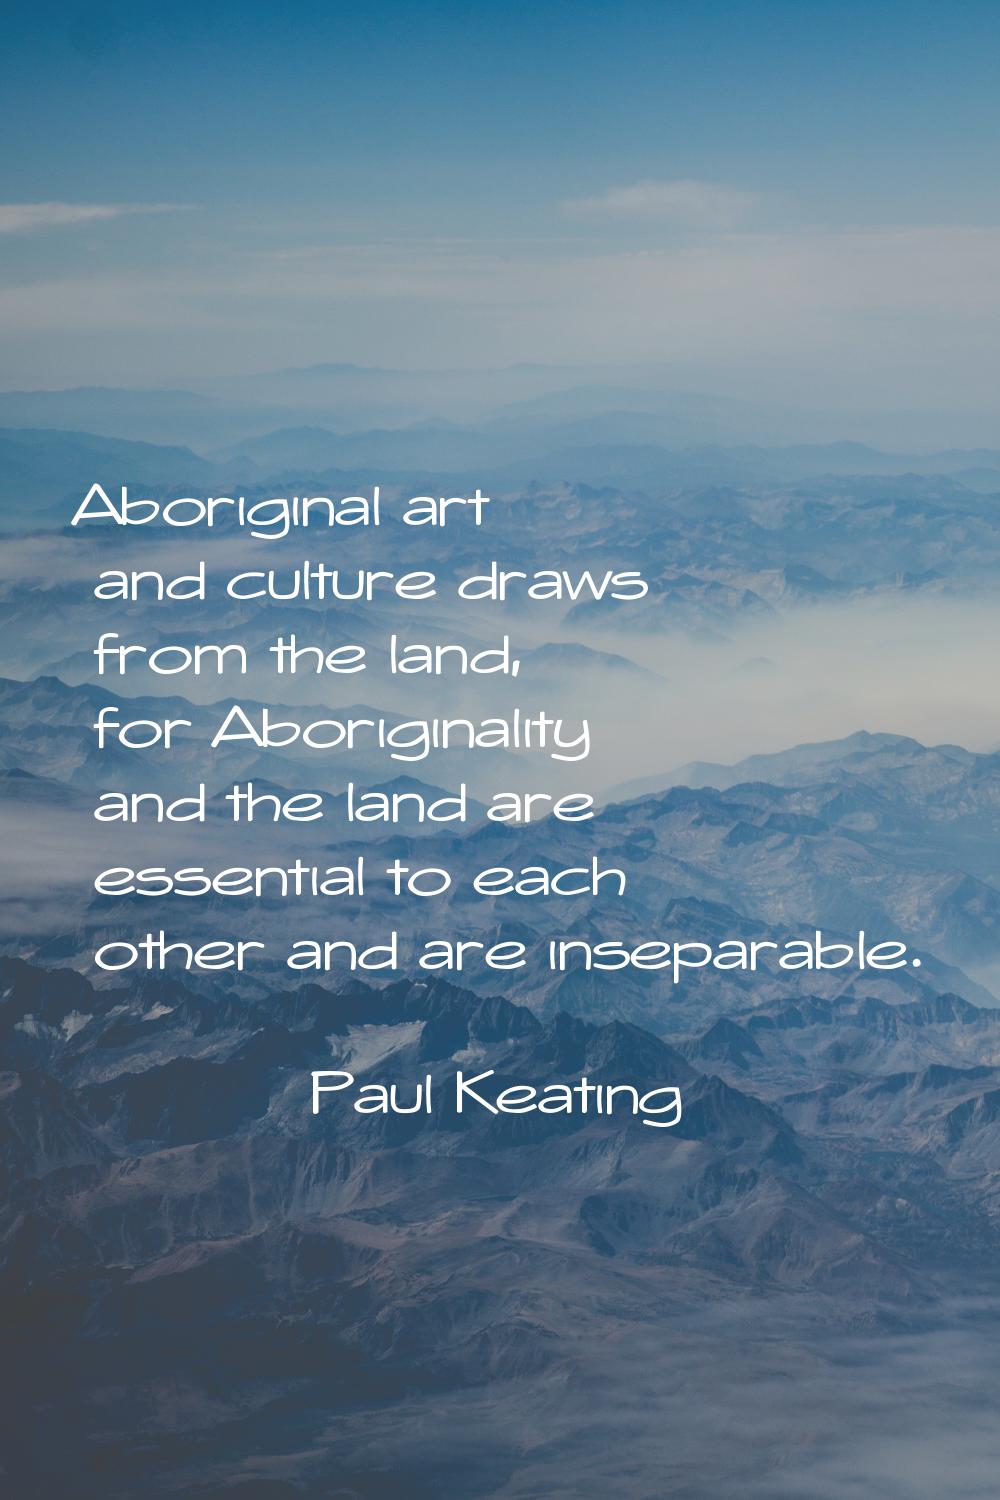 Aboriginal art and culture draws from the land, for Aboriginality and the land are essential to eac